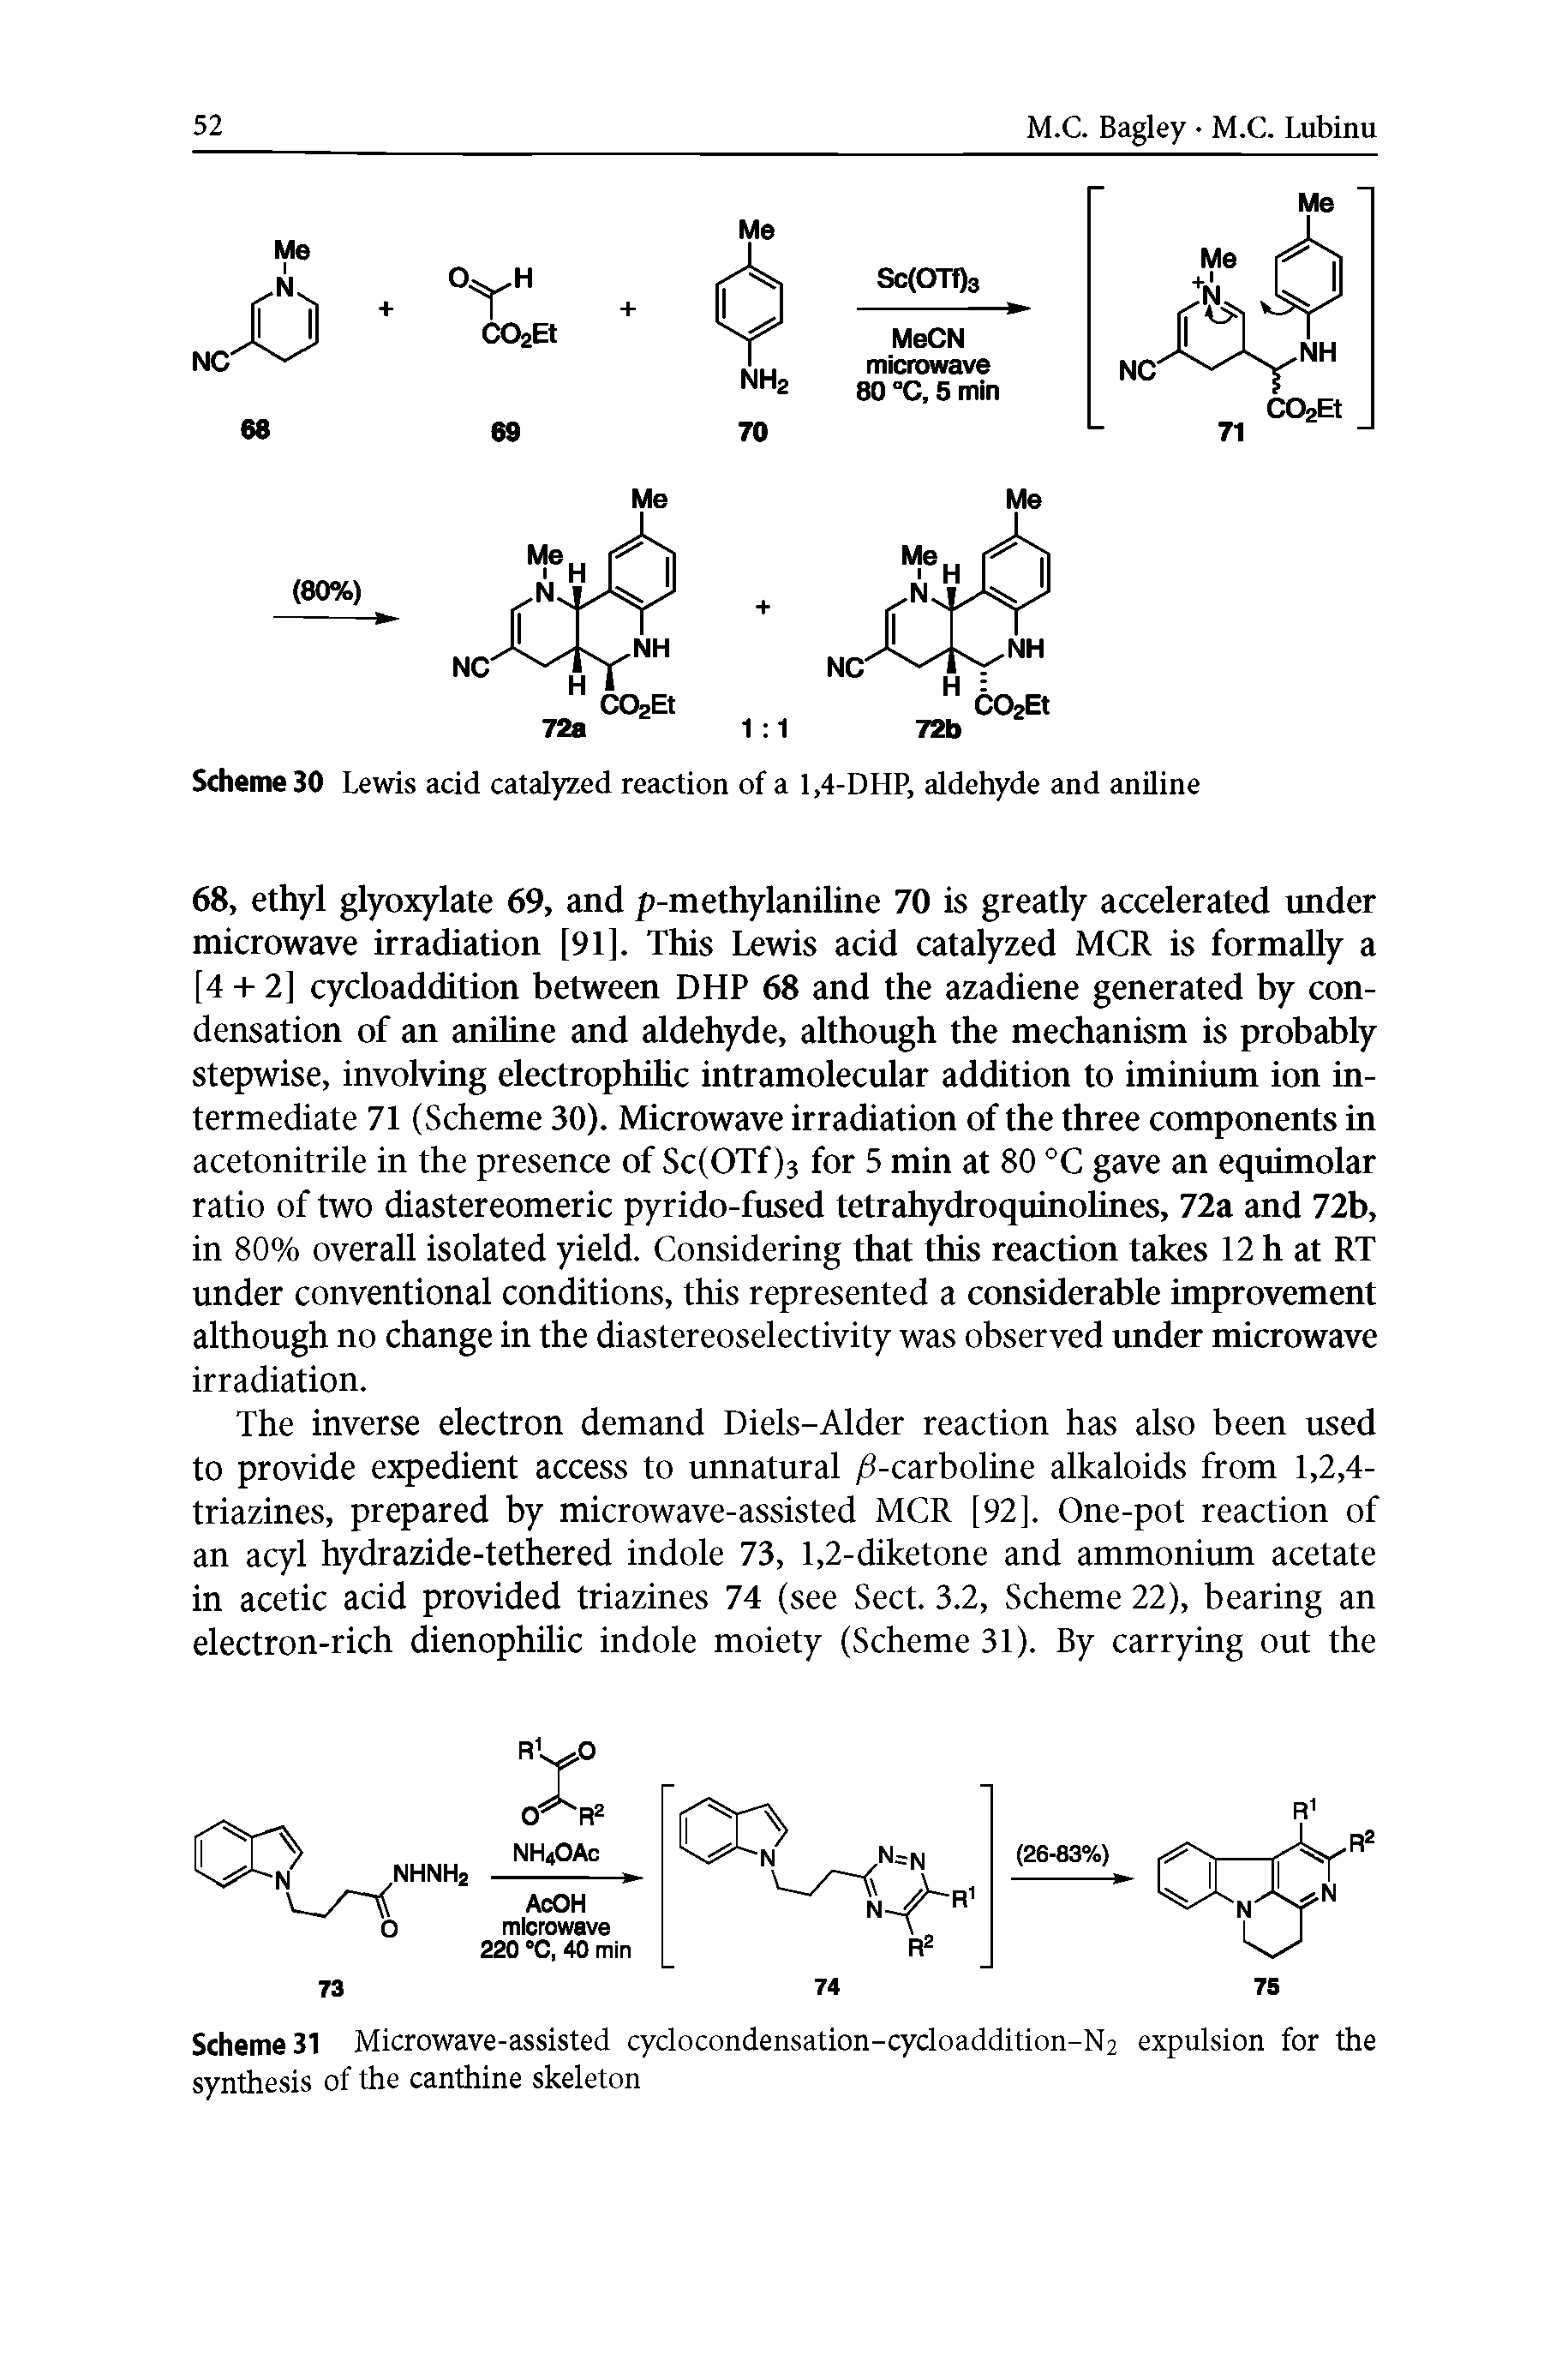 Scheme 30 Lewis acid catalyzed reaction of a 1,4-DHP, aldehyde and aniline...